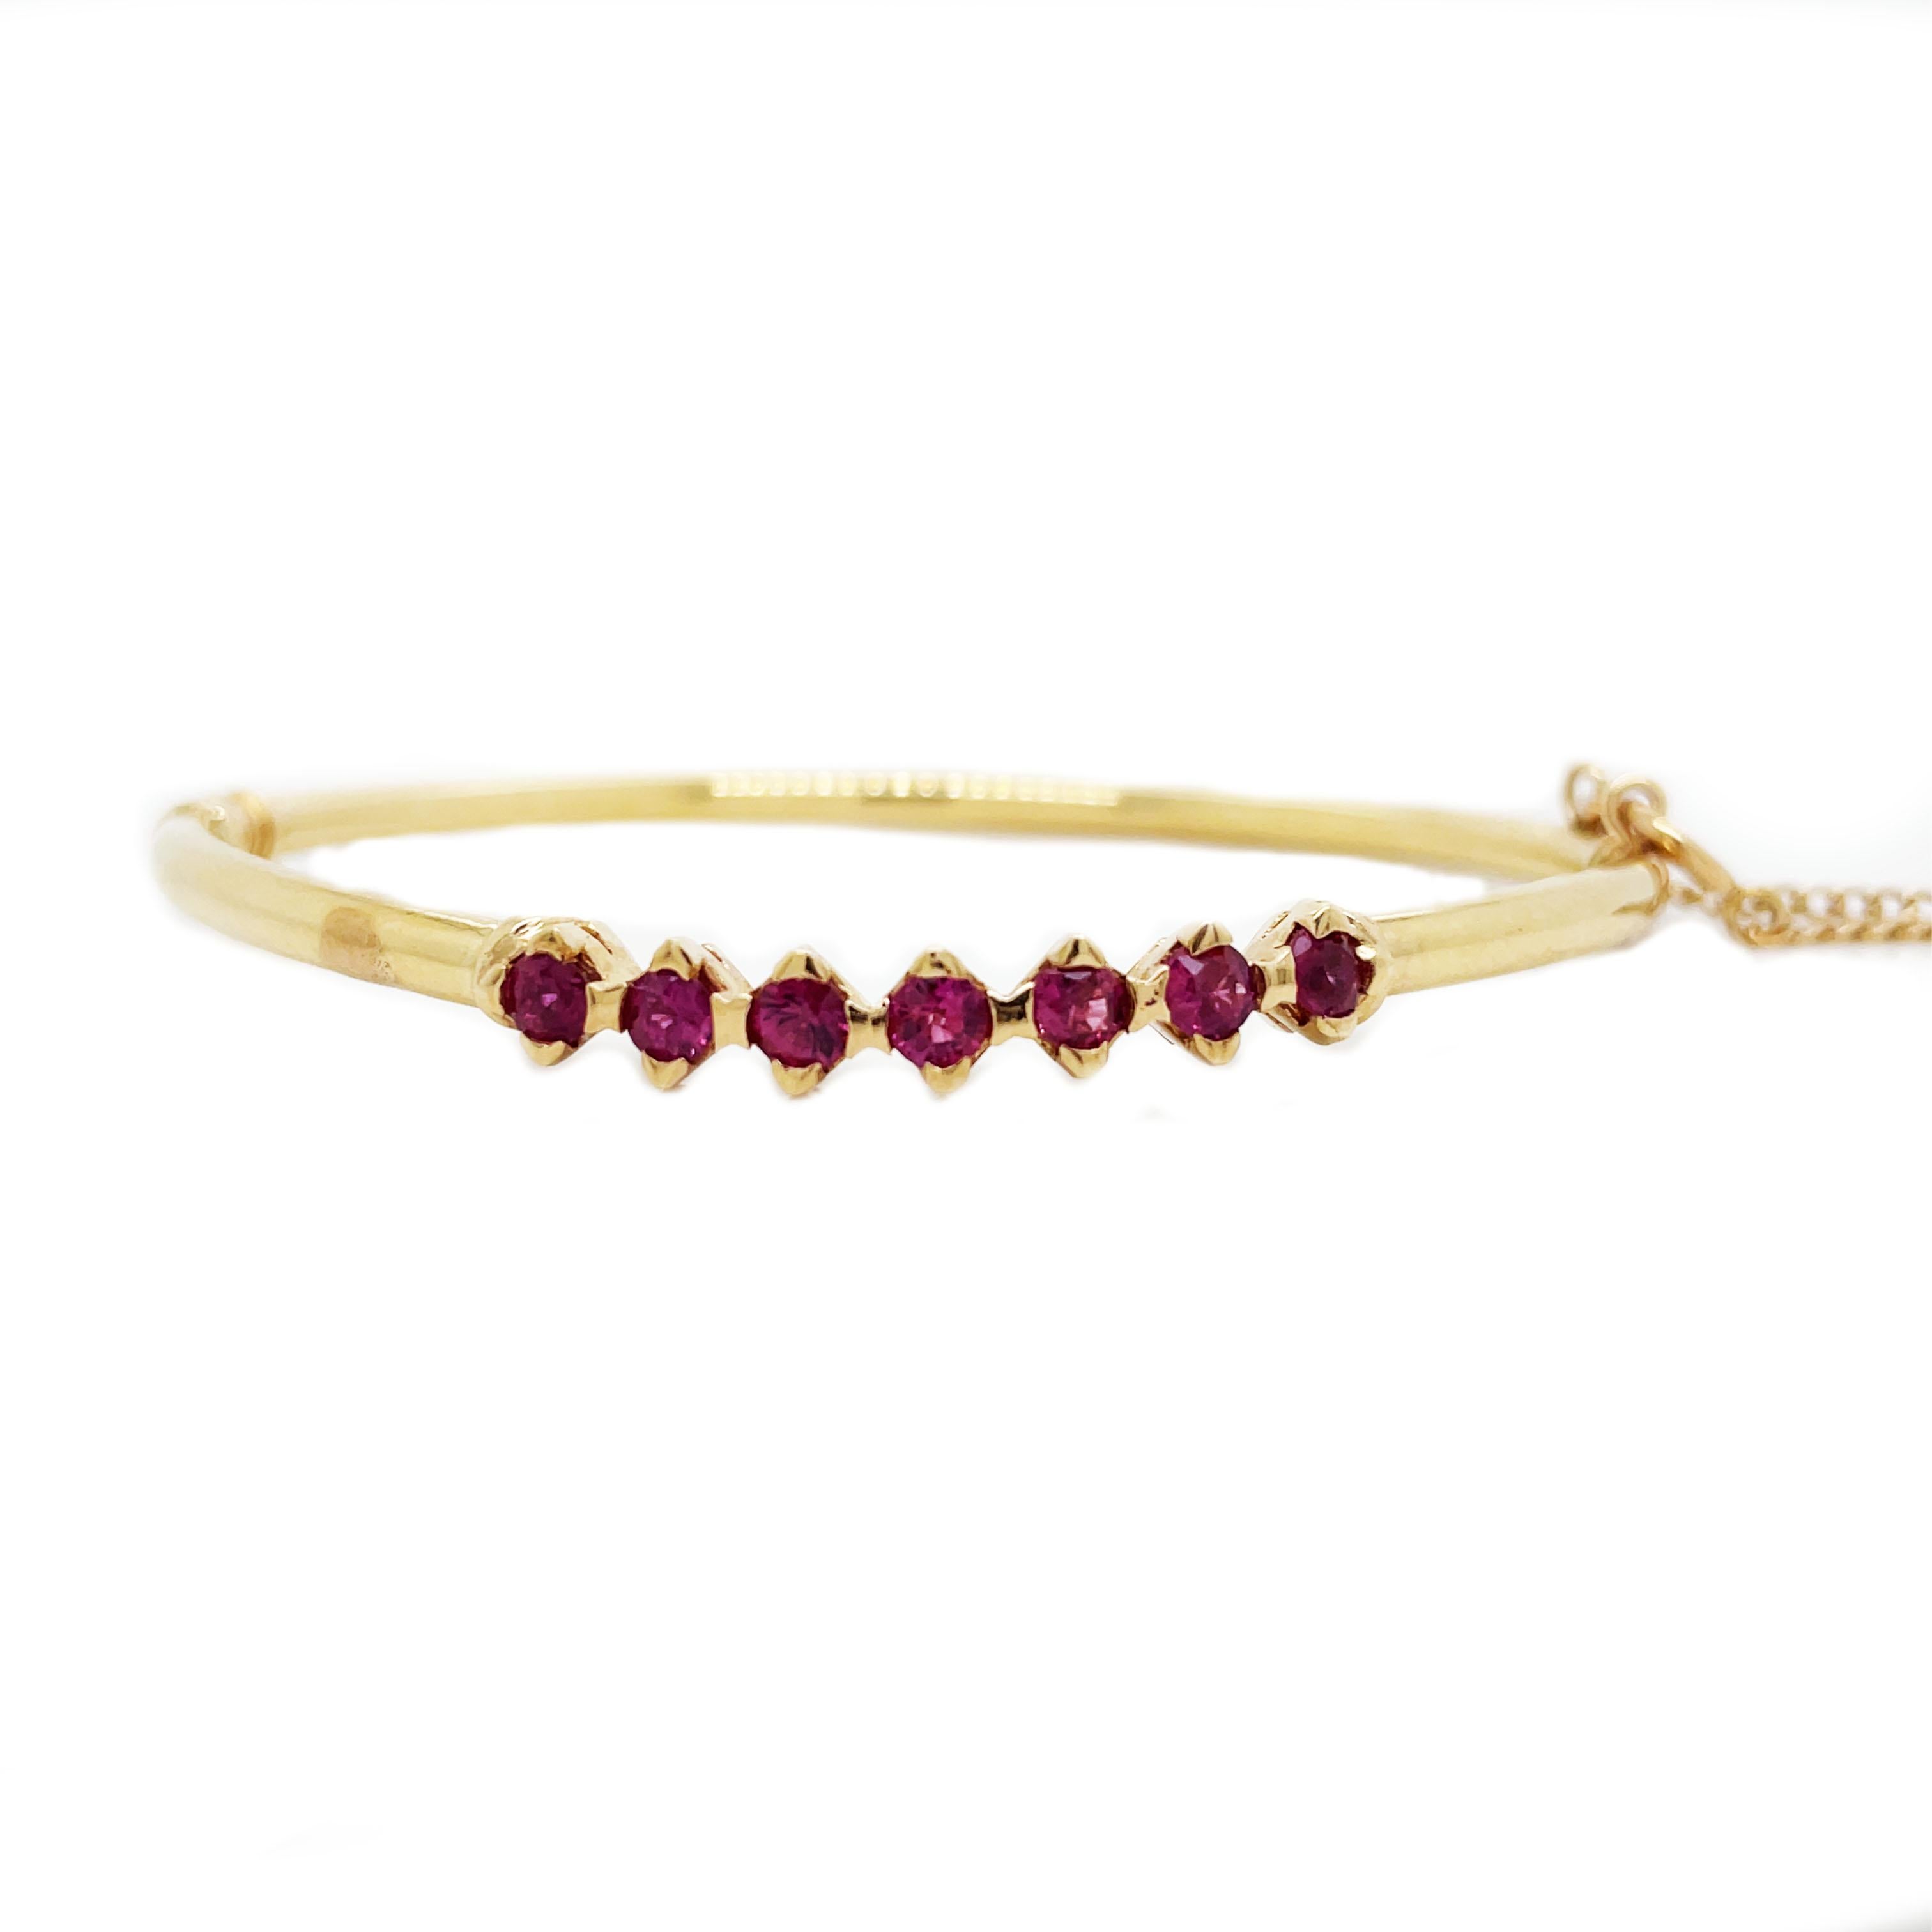 This is a beautiful 1960s bangle crafted in 14K yellow gold that showcases bright and vibrant rubies! The bangle is hinged which allows for ease of wear and is extremely comfortable for everyday wear! In this chic, sophisticated, and classic